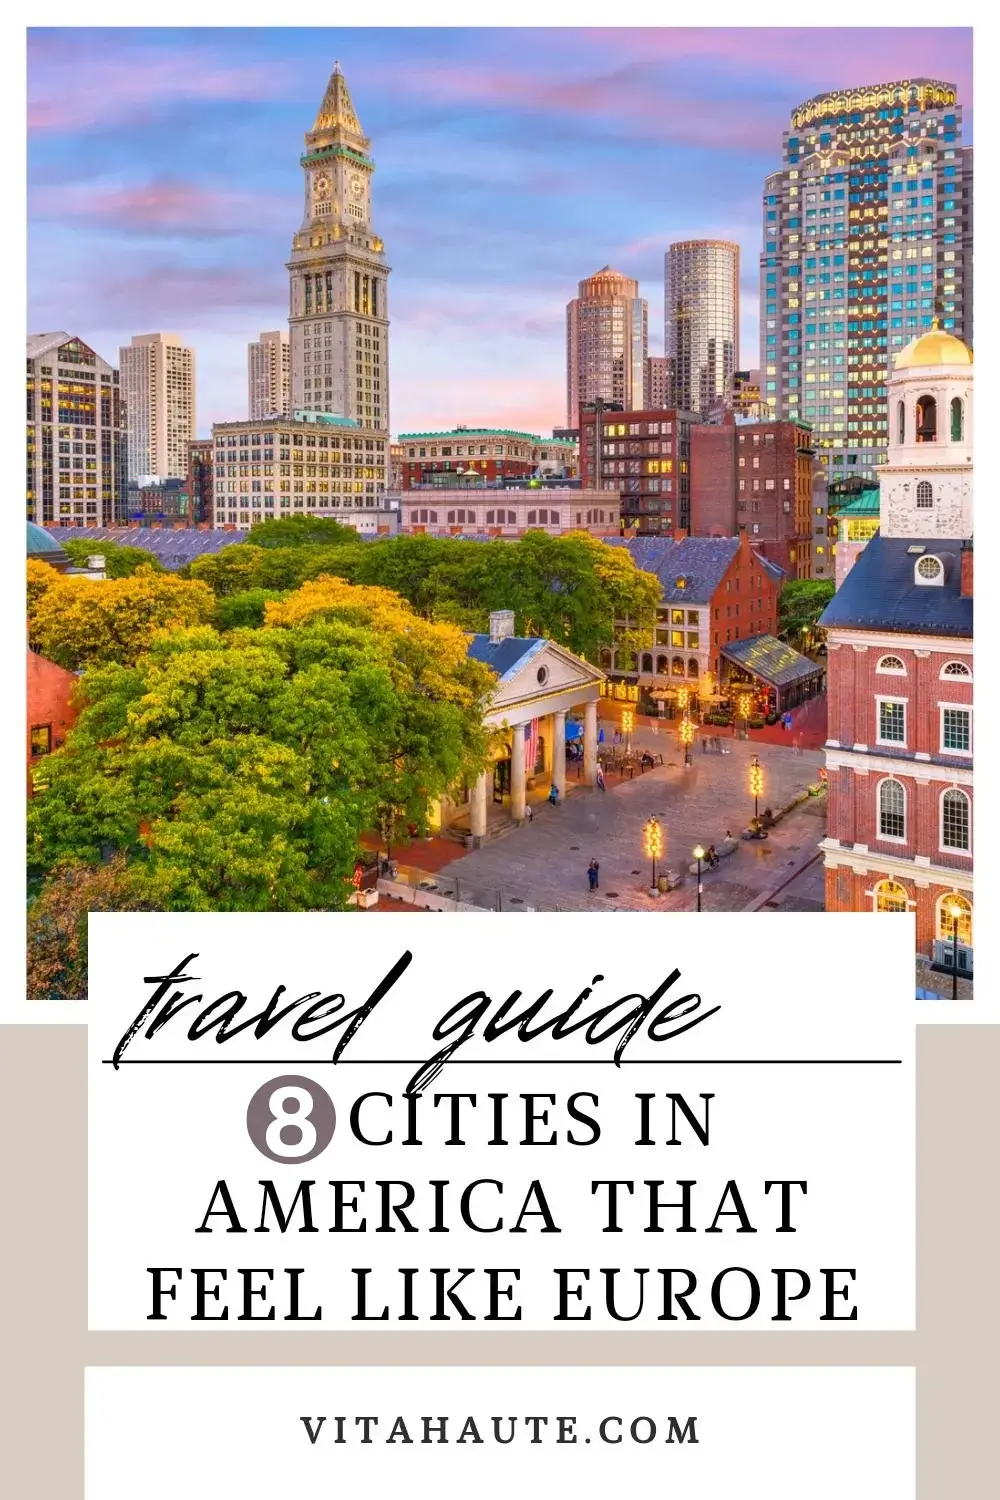 photo showcasing the European charm of eight American cities with picturesque architecture, reminiscent of the Old World